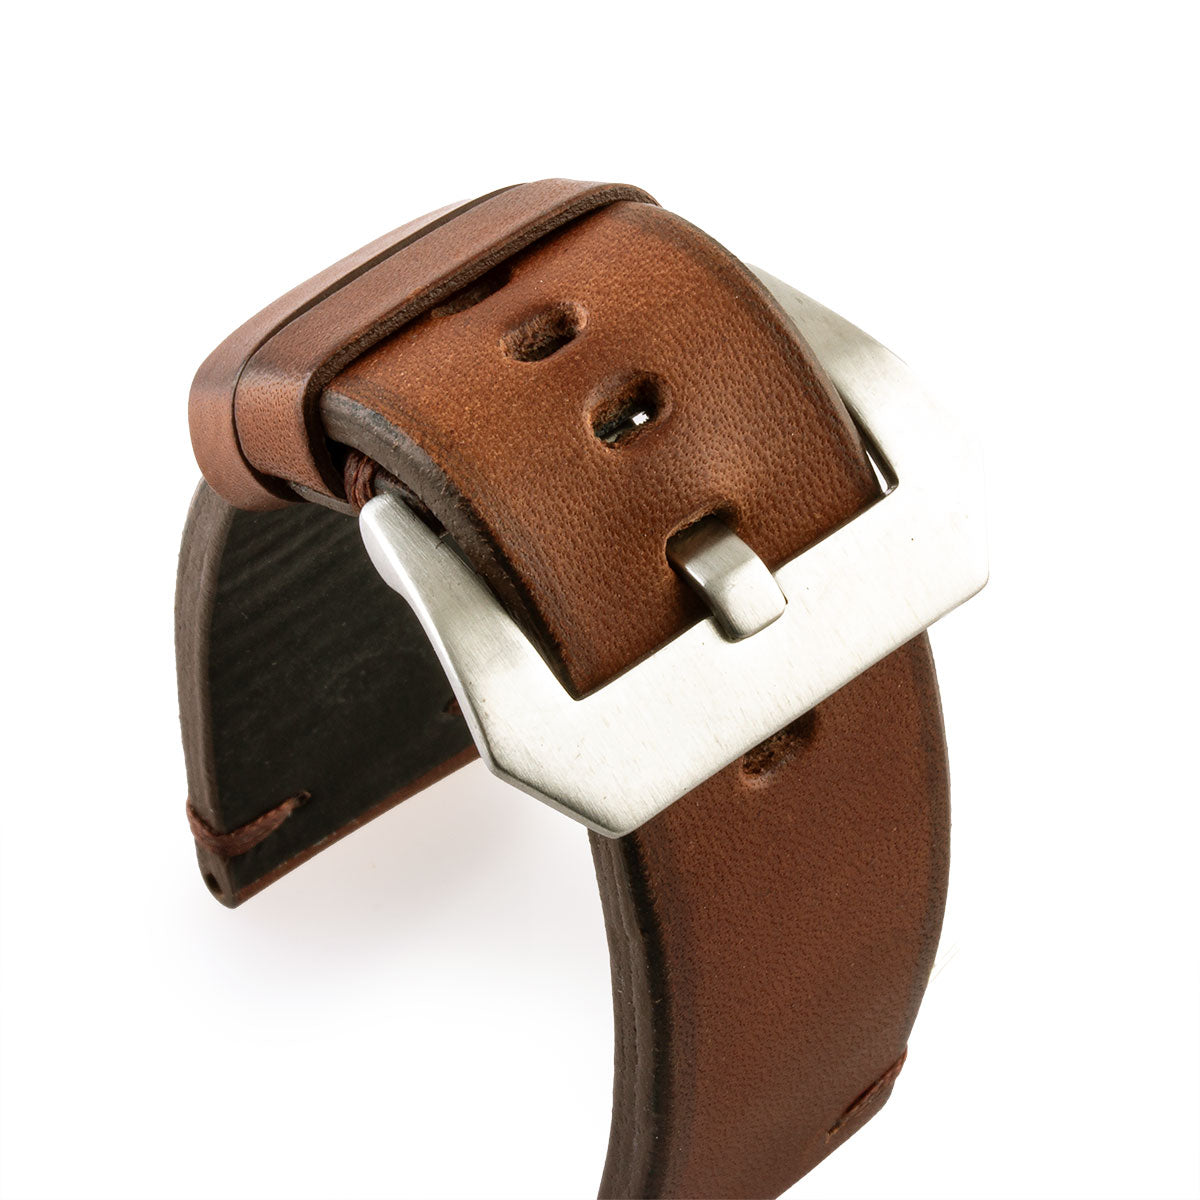 ​Panerai Luminor - Vintage leather watchband - Calf (brown, blue, red, taupe)